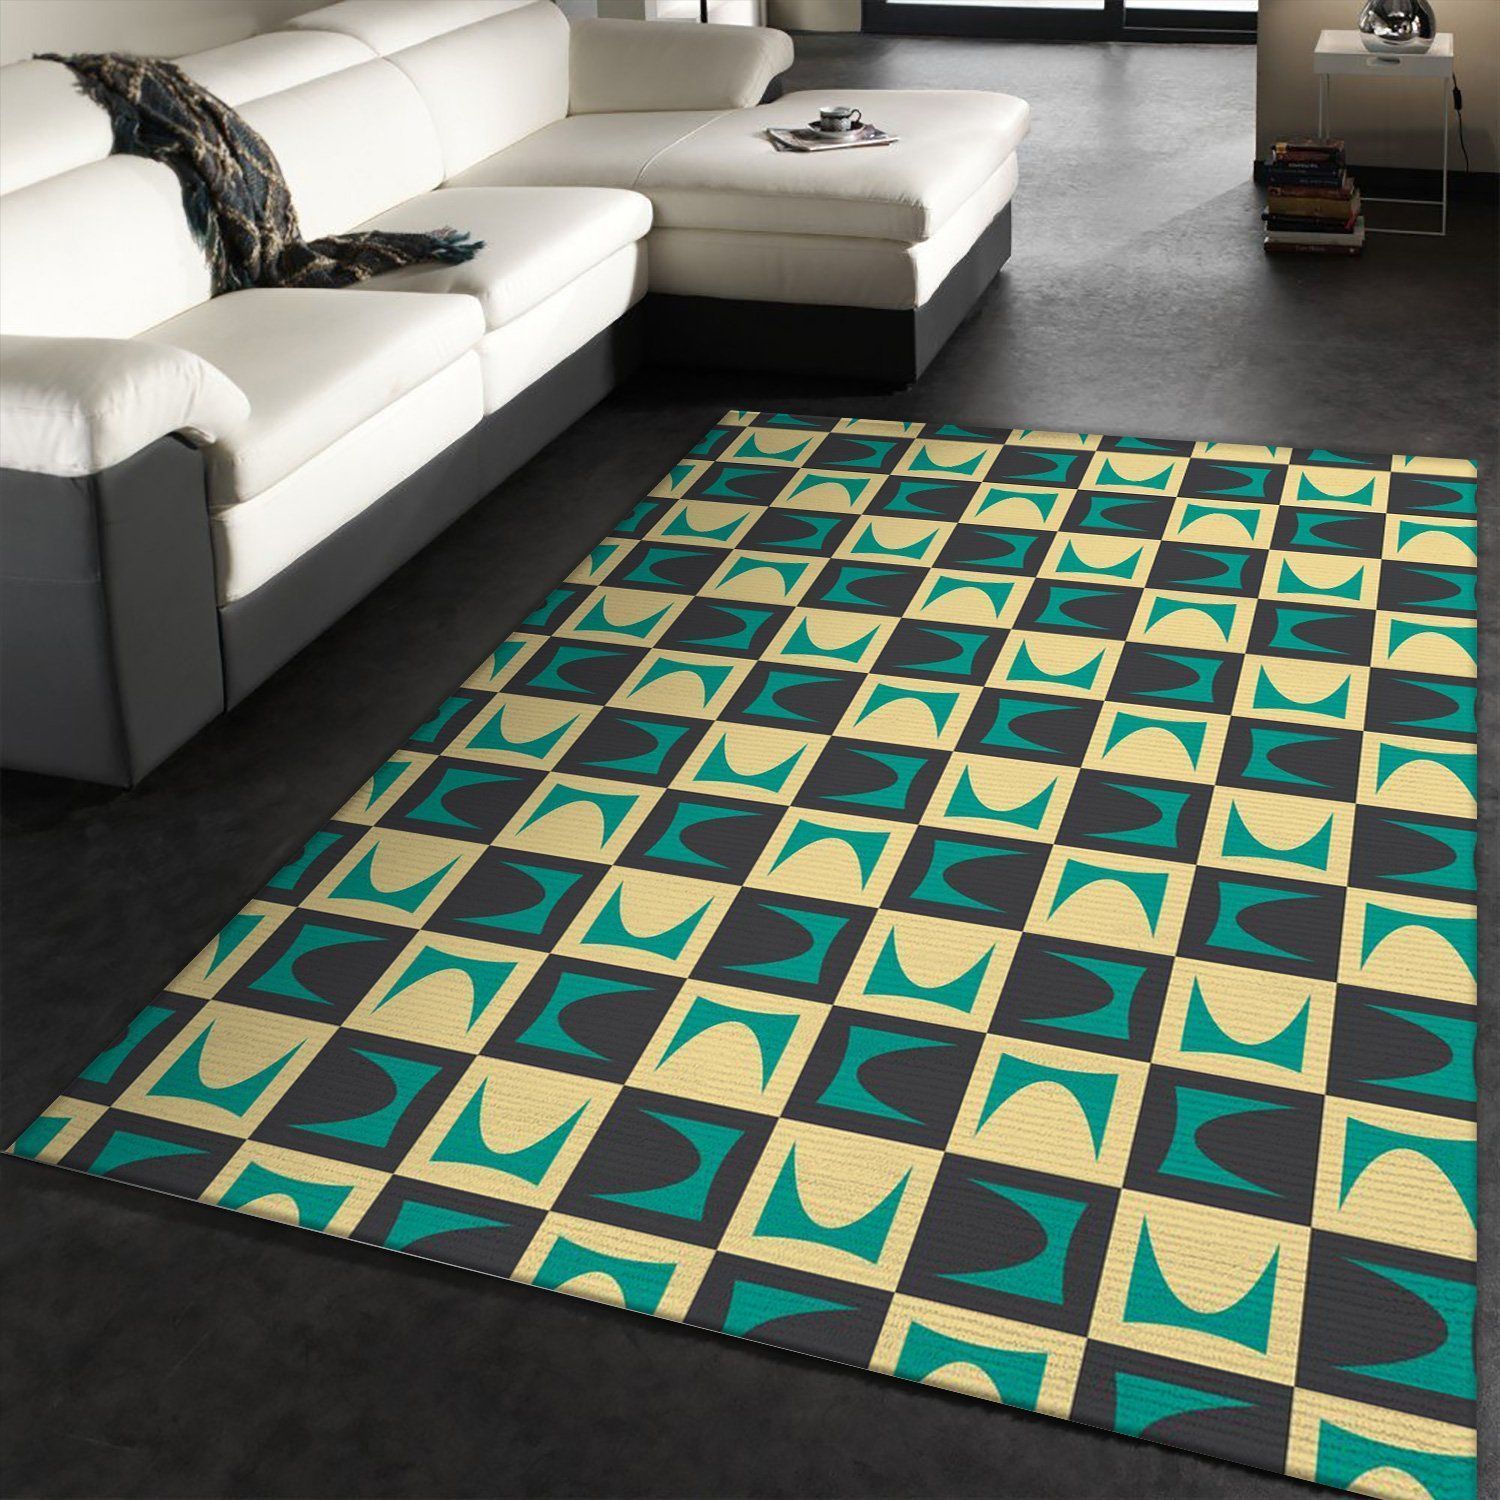 Midcentury Pattern 27 Area Rug, Living Room Rug, Family Gift US Decor - Indoor Outdoor Rugs